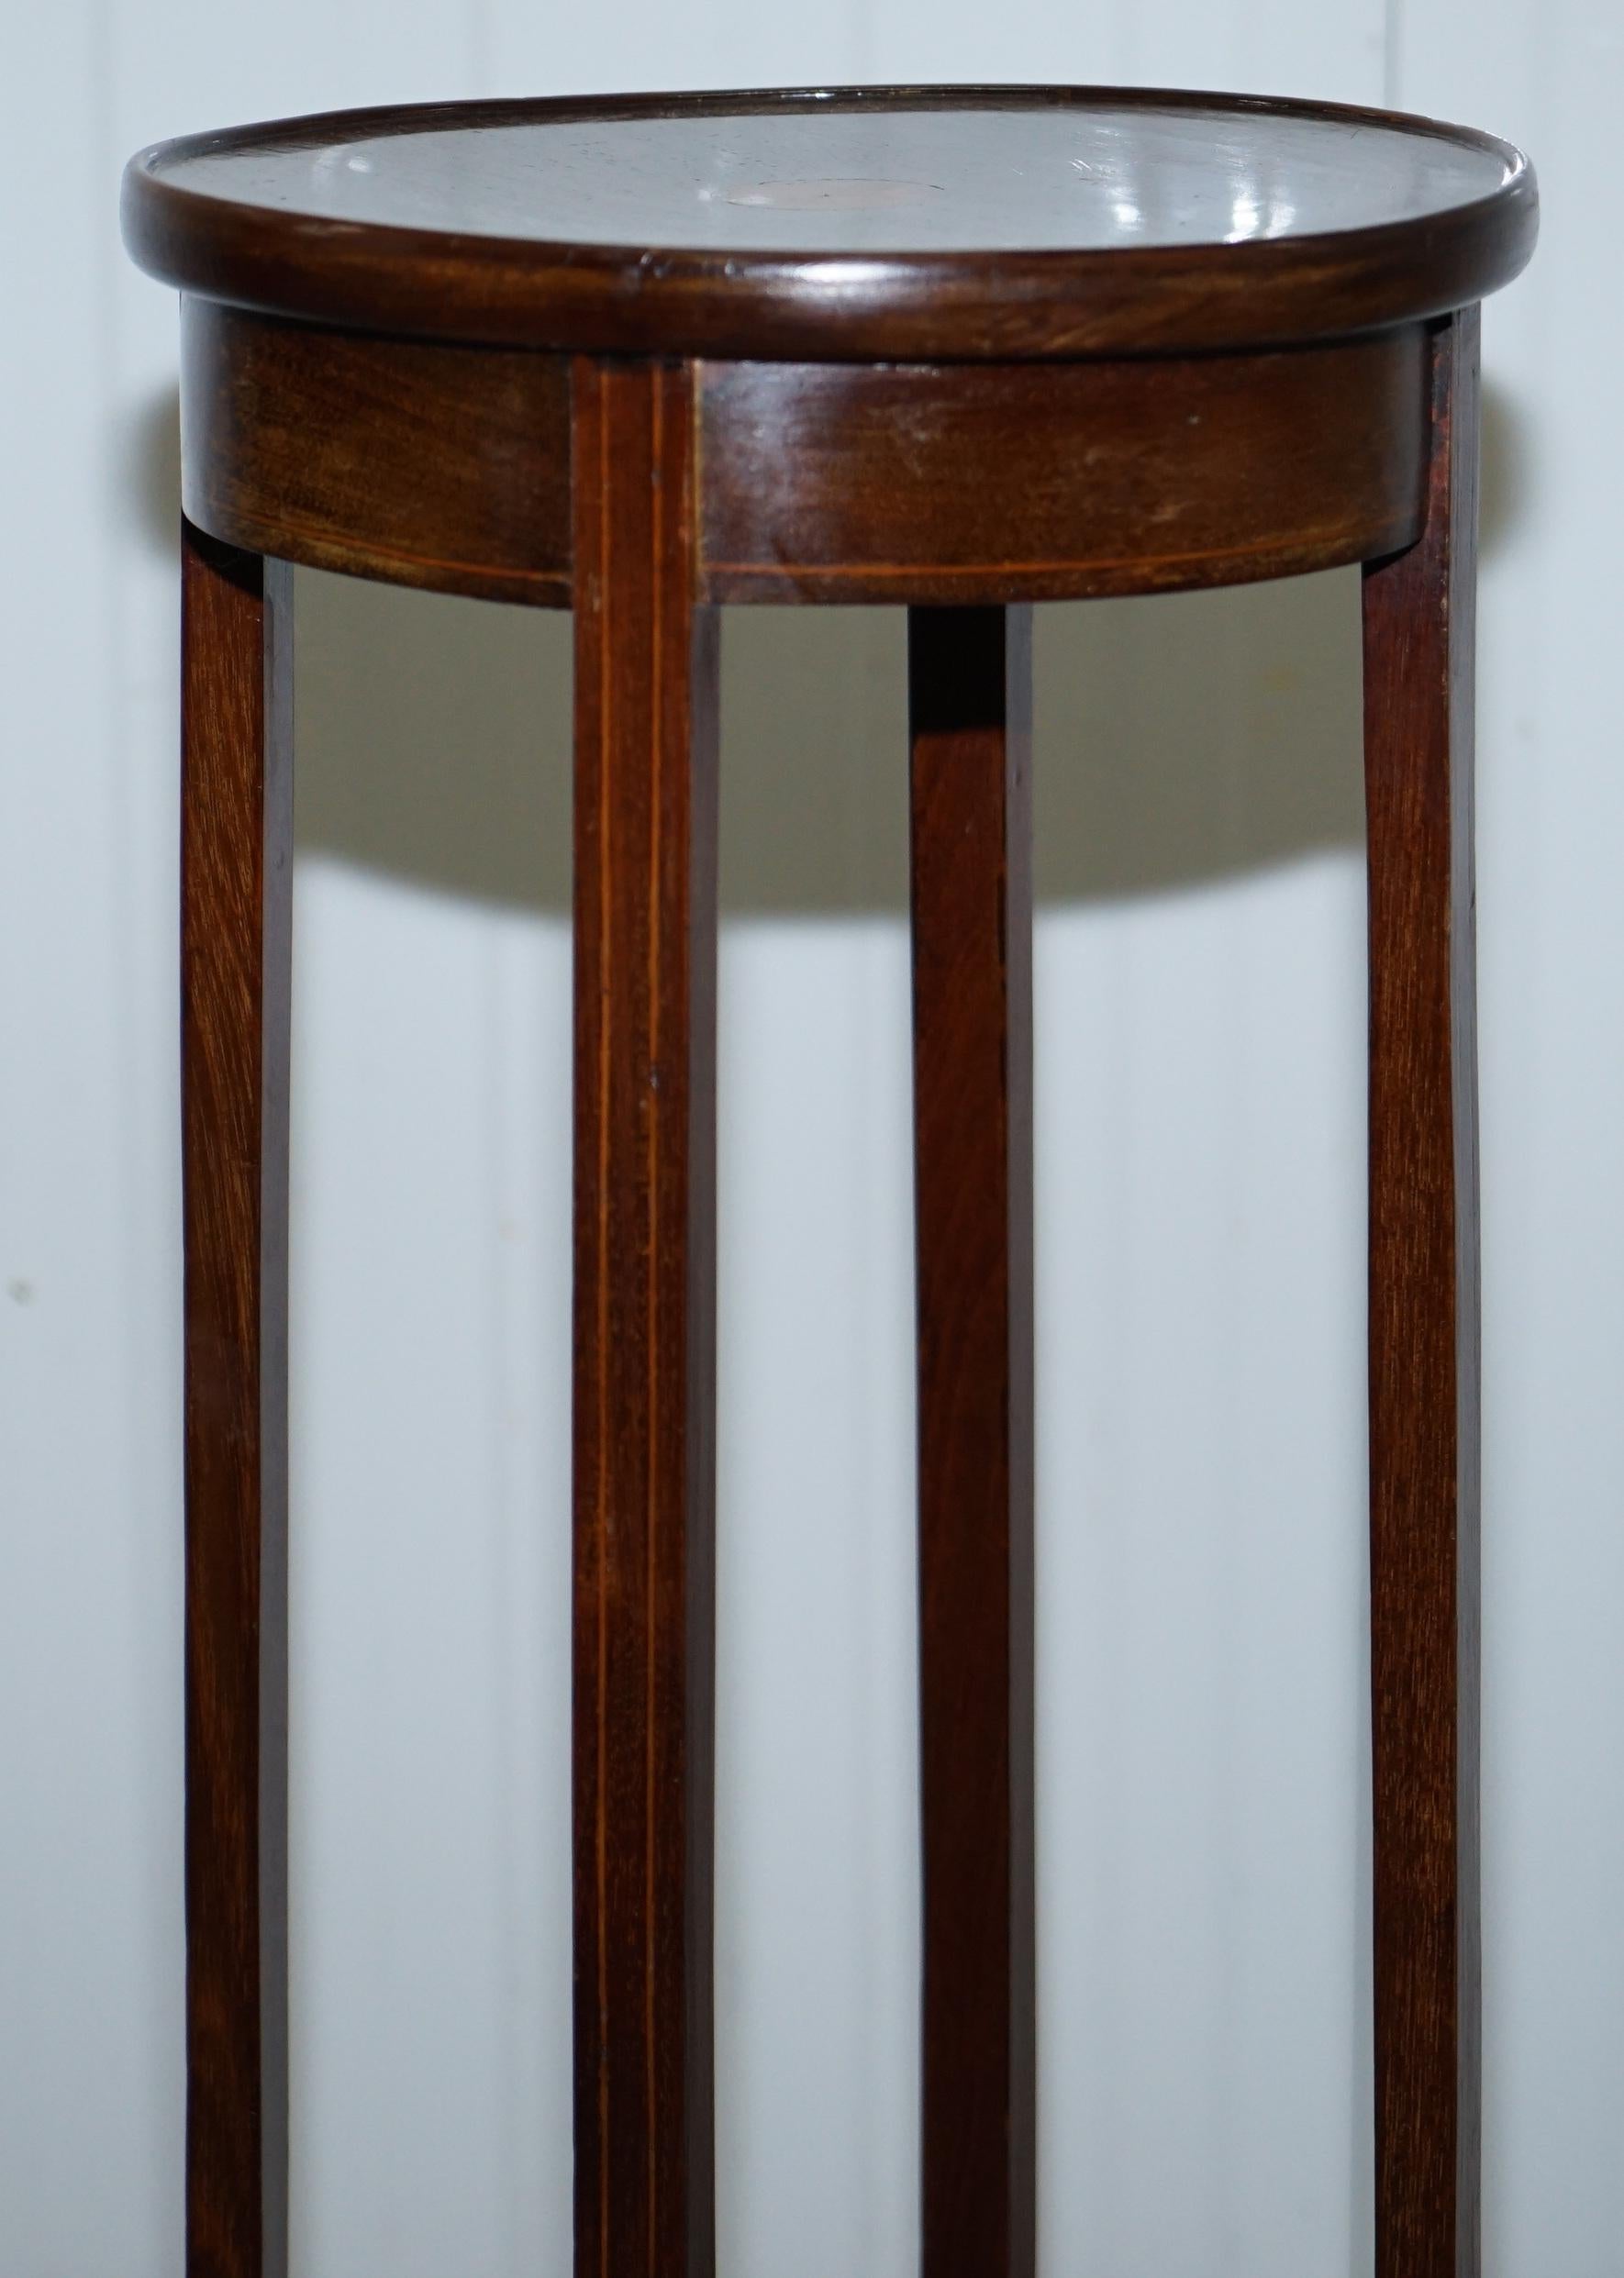 Hand-Carved Nice Victorian Mahogany Handmade in England Jardinière Plant Pot Stand 1 of 2